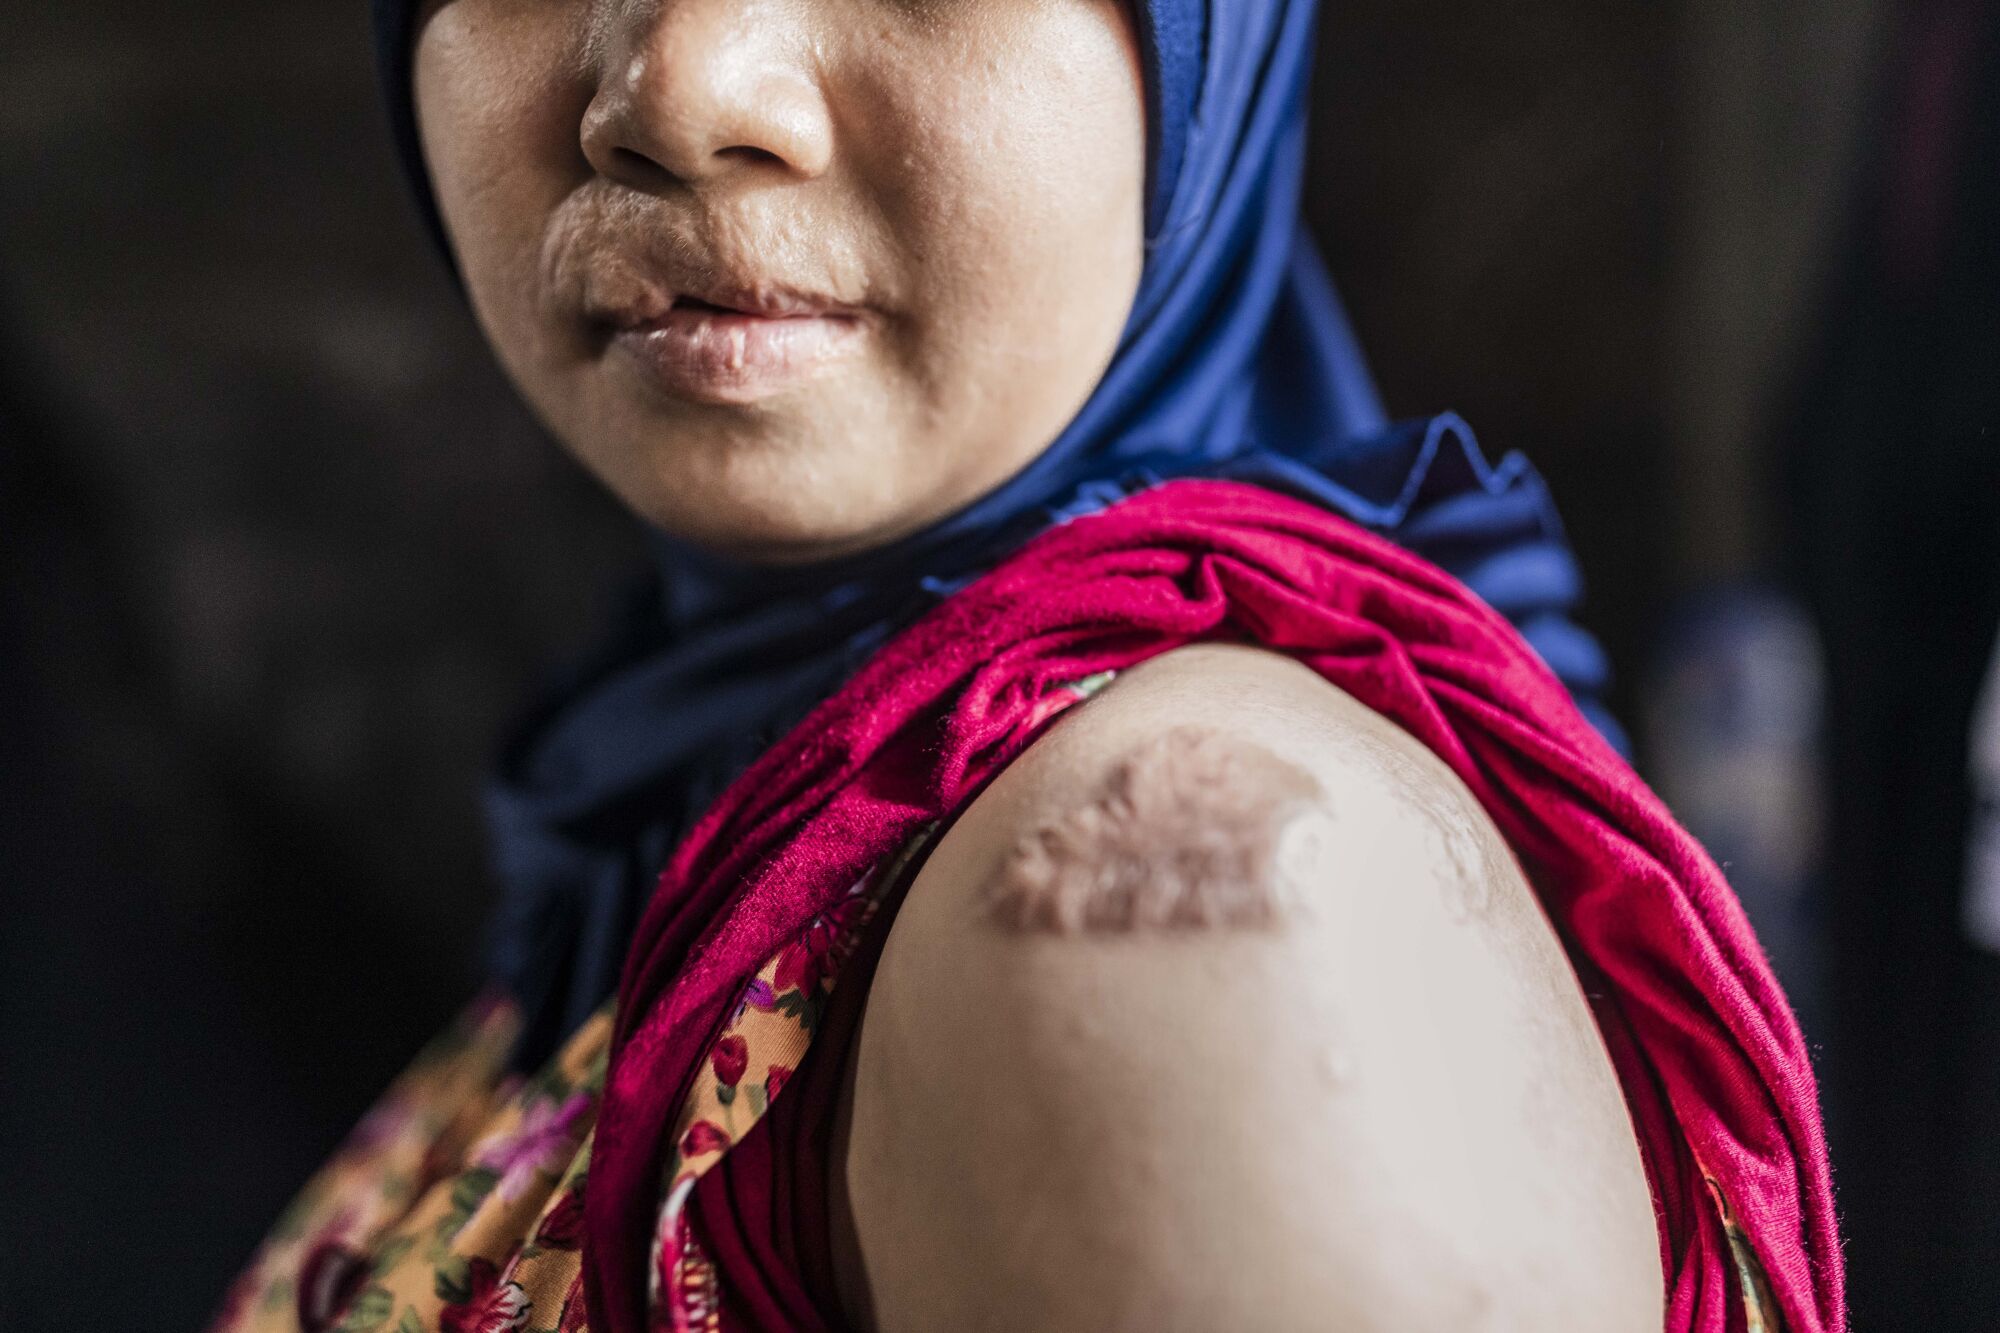 A woman bears marks of abuse on her lips and upper arm  